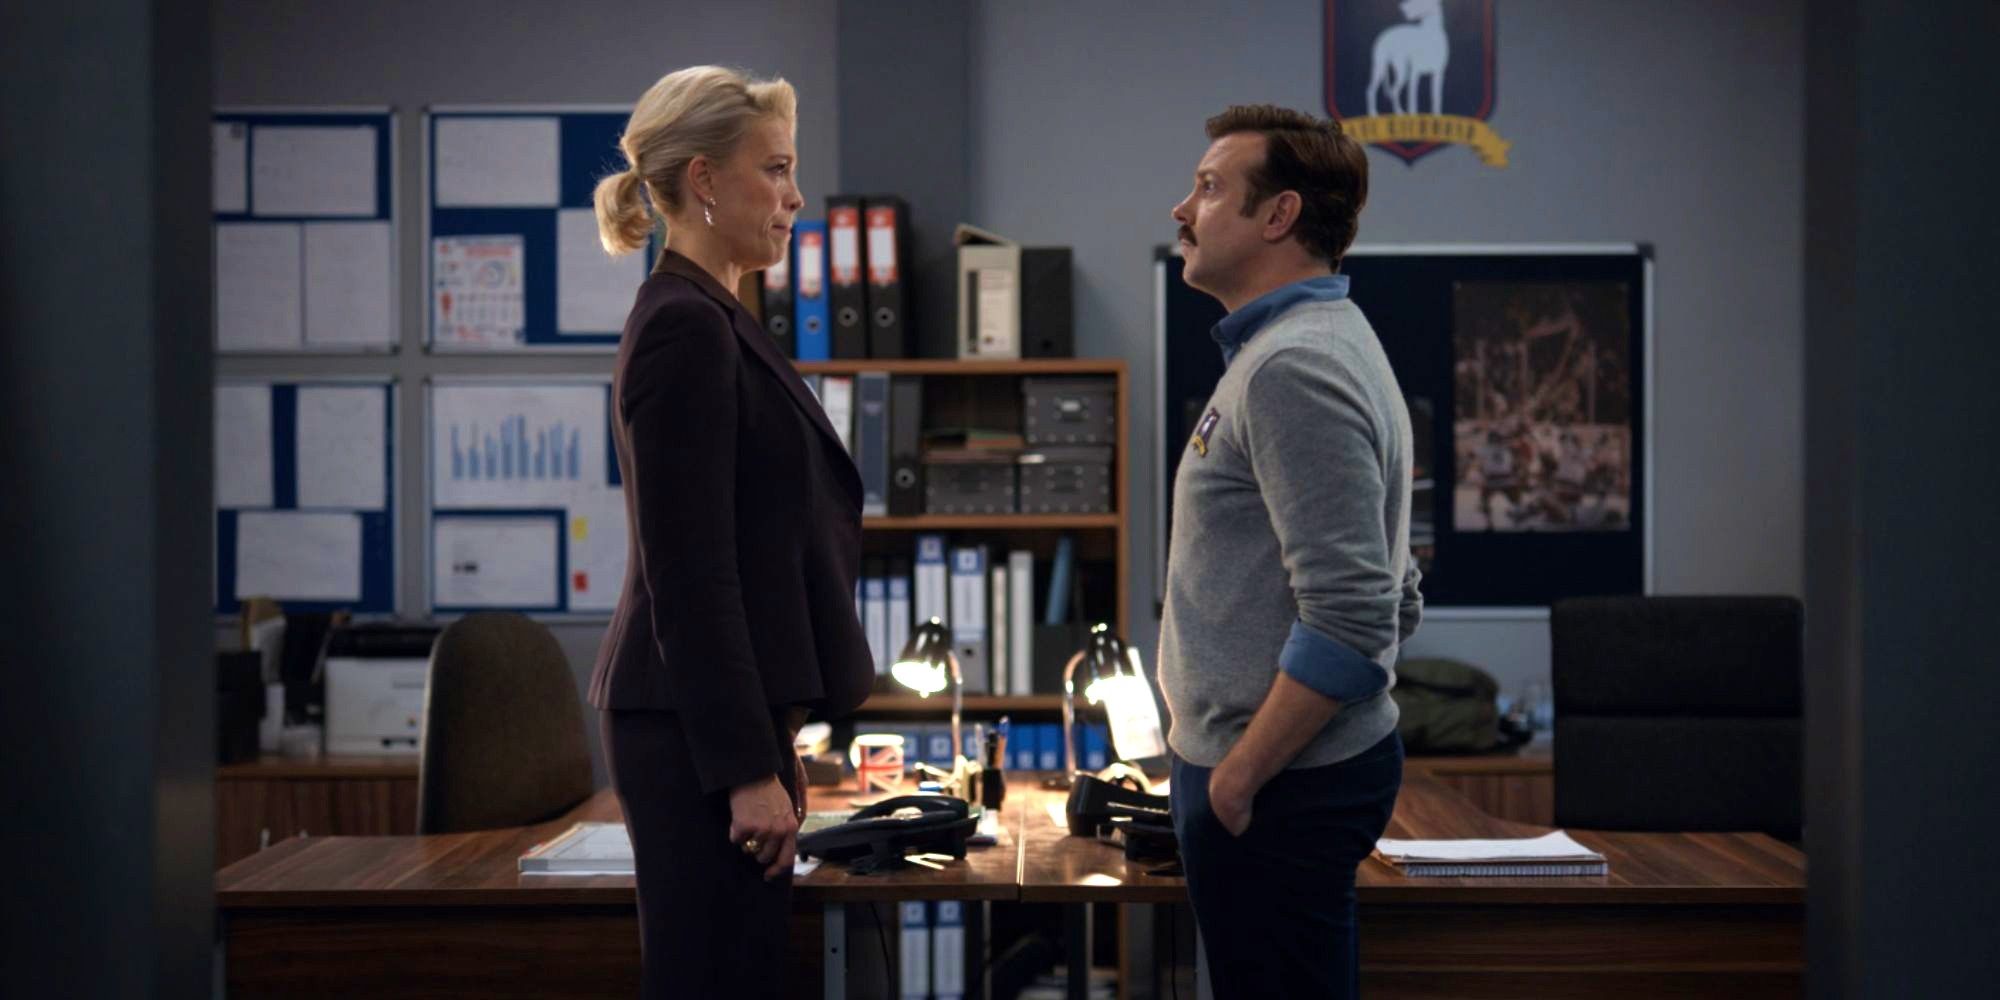 Jason Sudeikis as Ted Lasso and Hannah Waddingham as Rebecca Welton talking in 